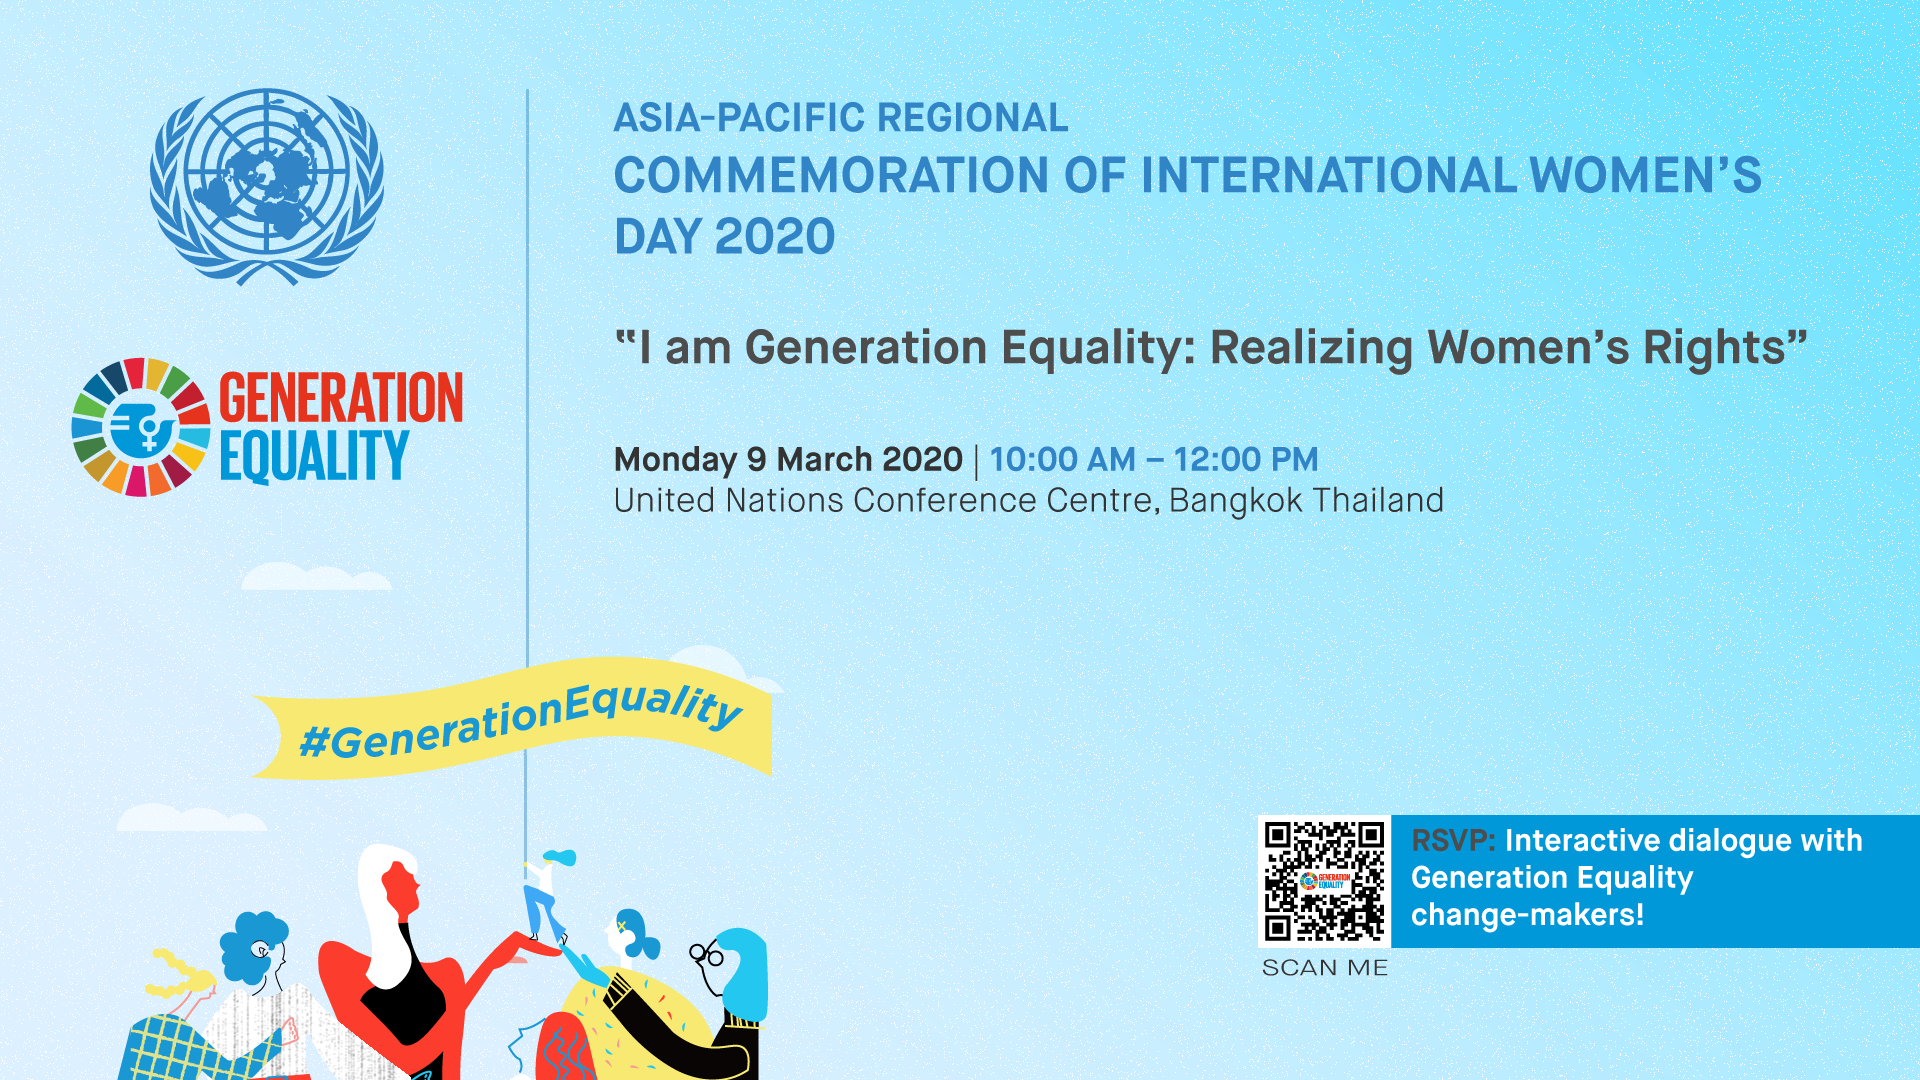 Young change-makers take the lead on realizing women’s rights in Asia and the Pacific Regional Commemoration of International Women’s Day 2020